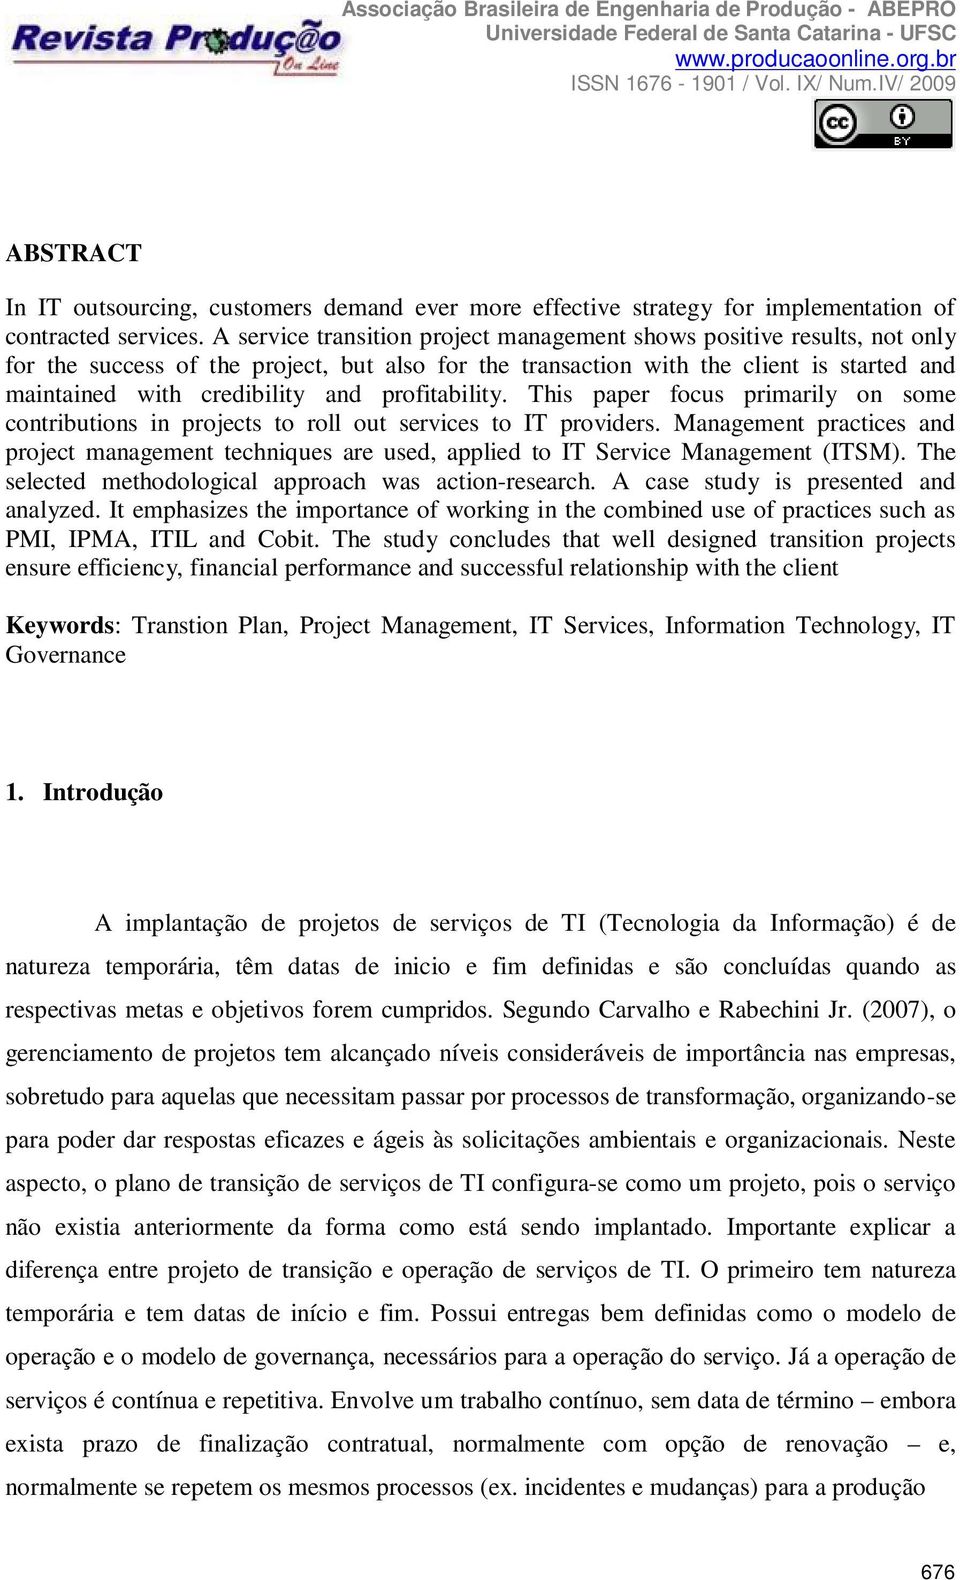 profitability. This paper focus primarily on some contributions in projects to roll out services to IT providers.